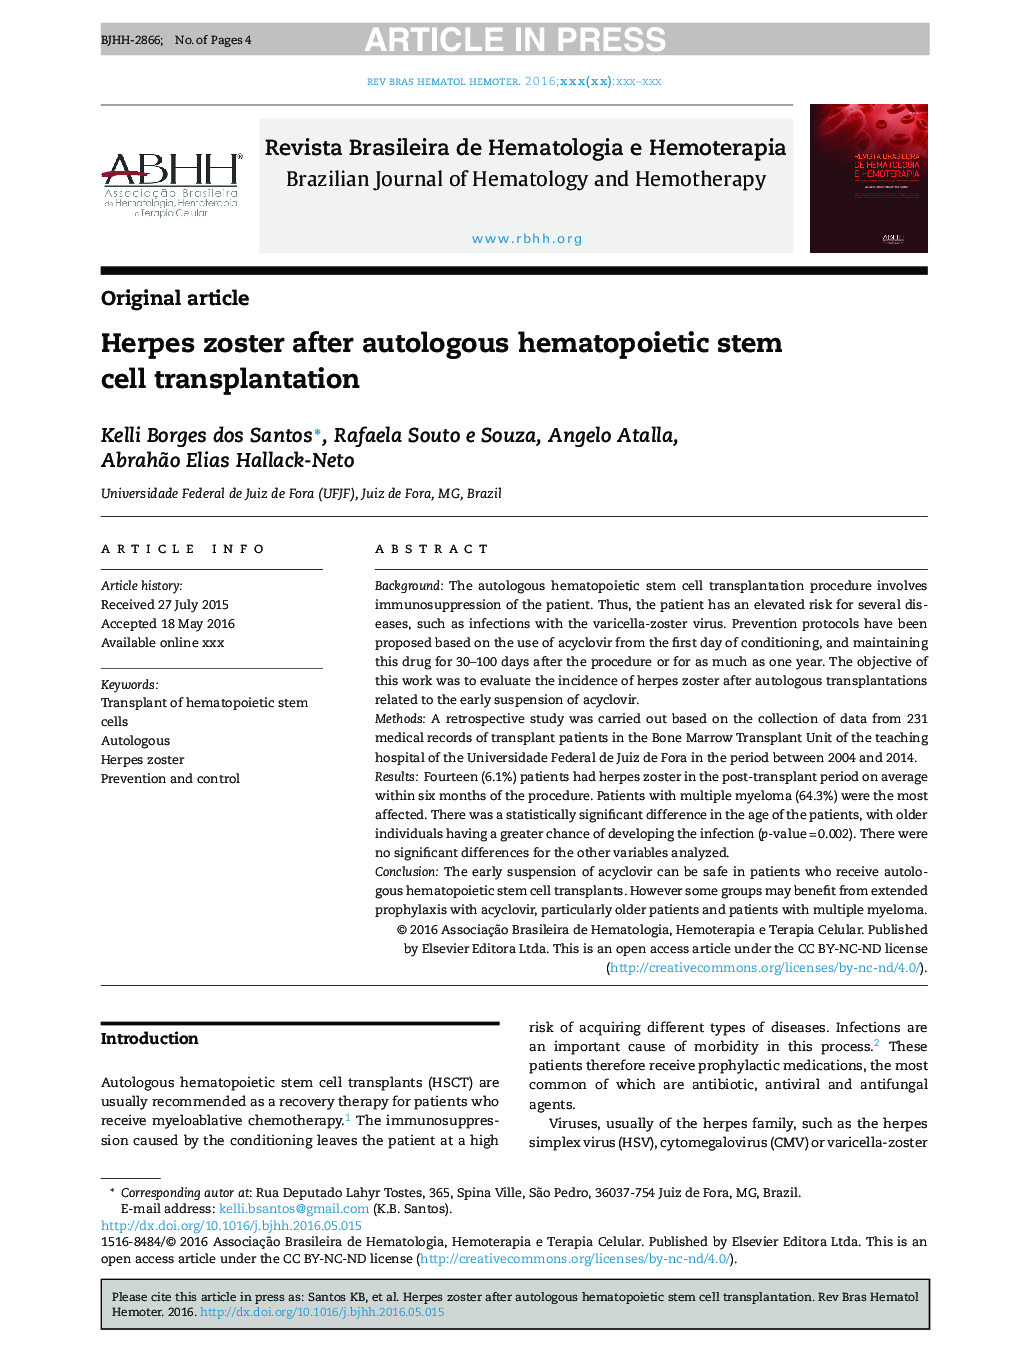 Herpes zoster after autologous hematopoietic stem cell transplantation